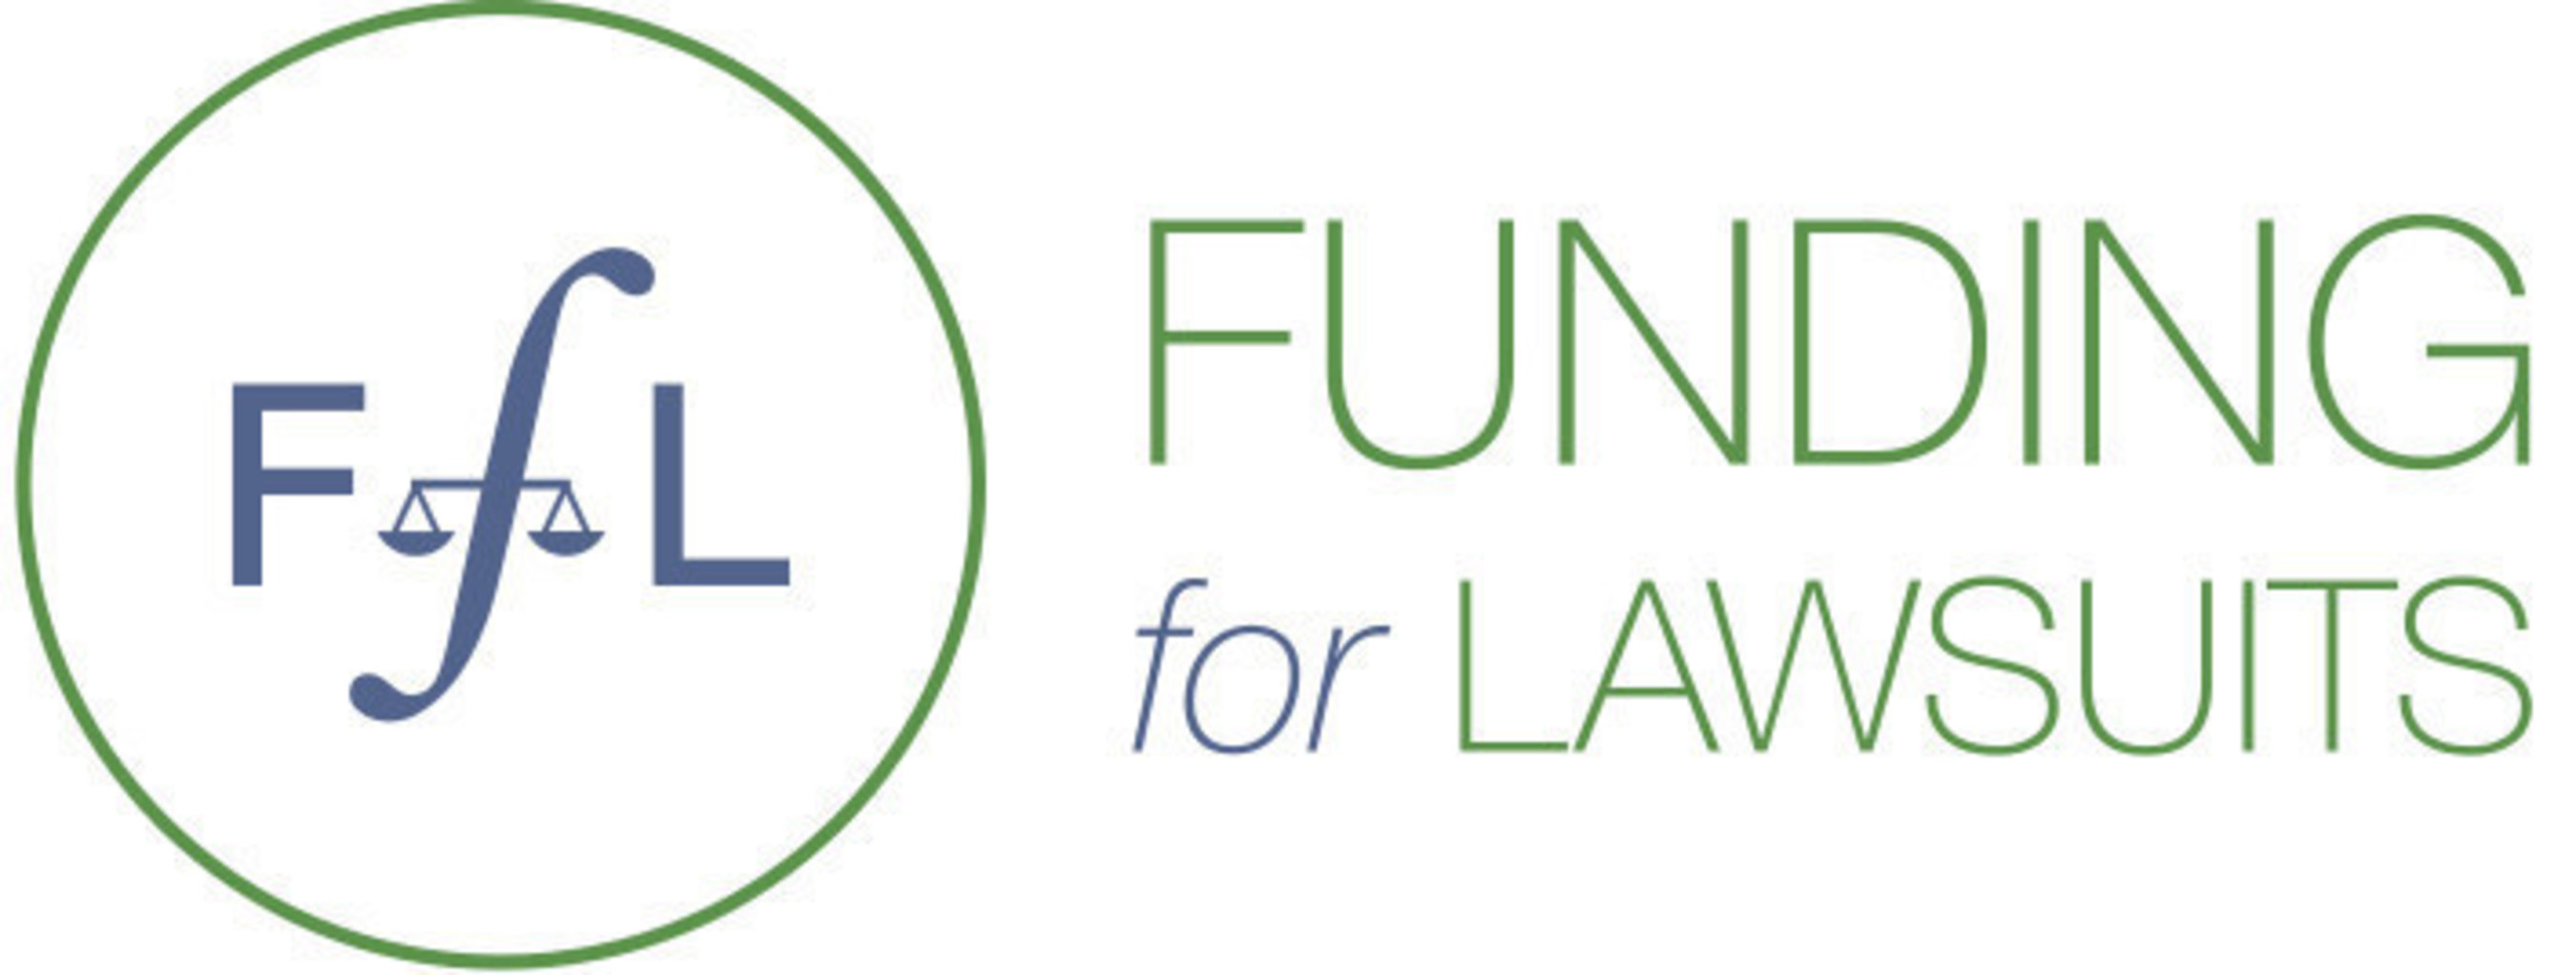 Funding for Lawsuits Logo